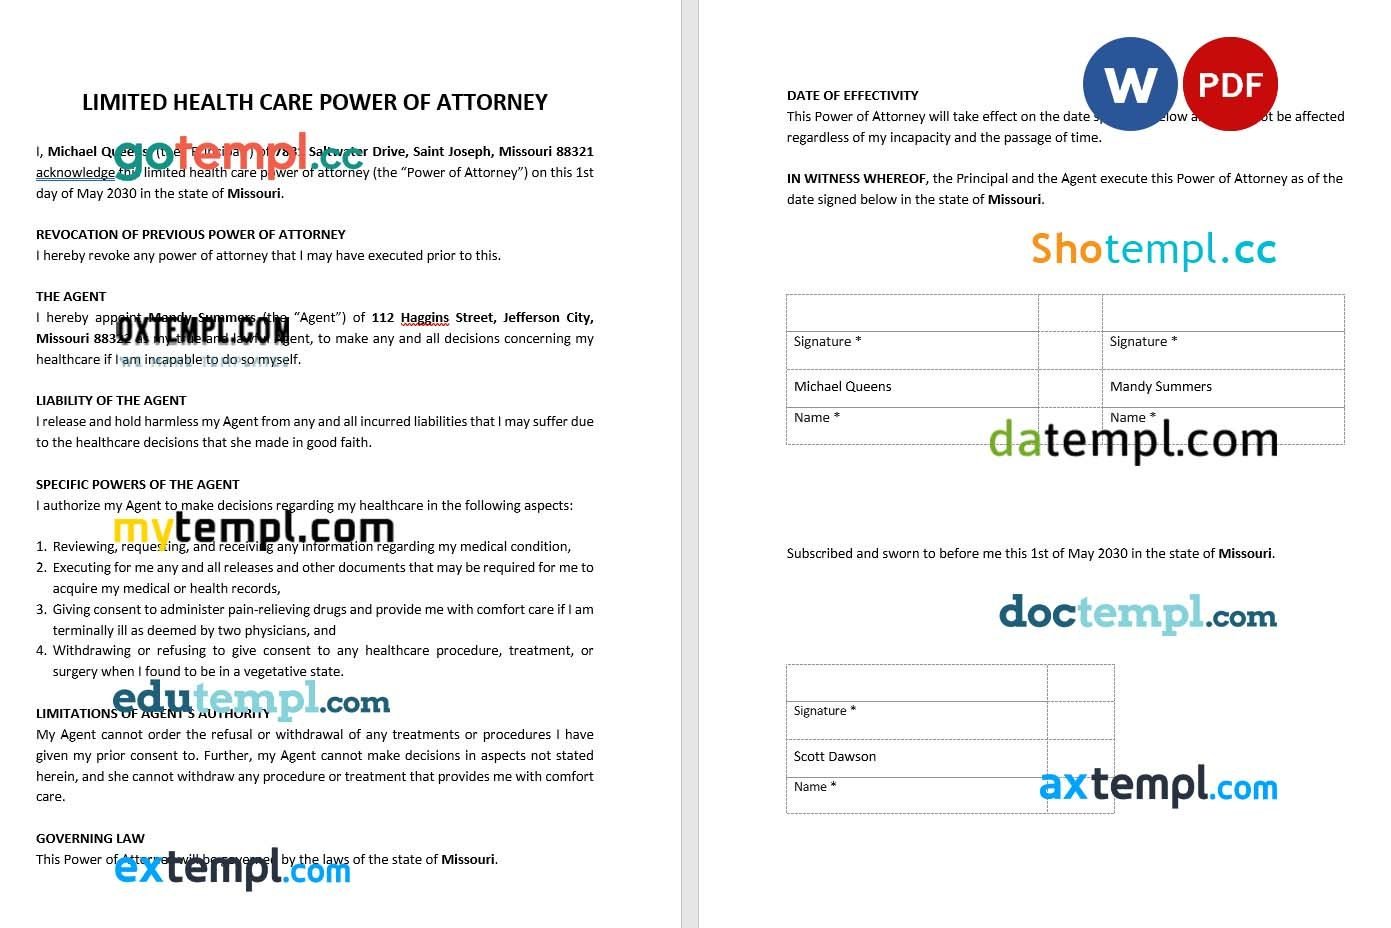 Limited Health Care Power of Attorney example, fully editable